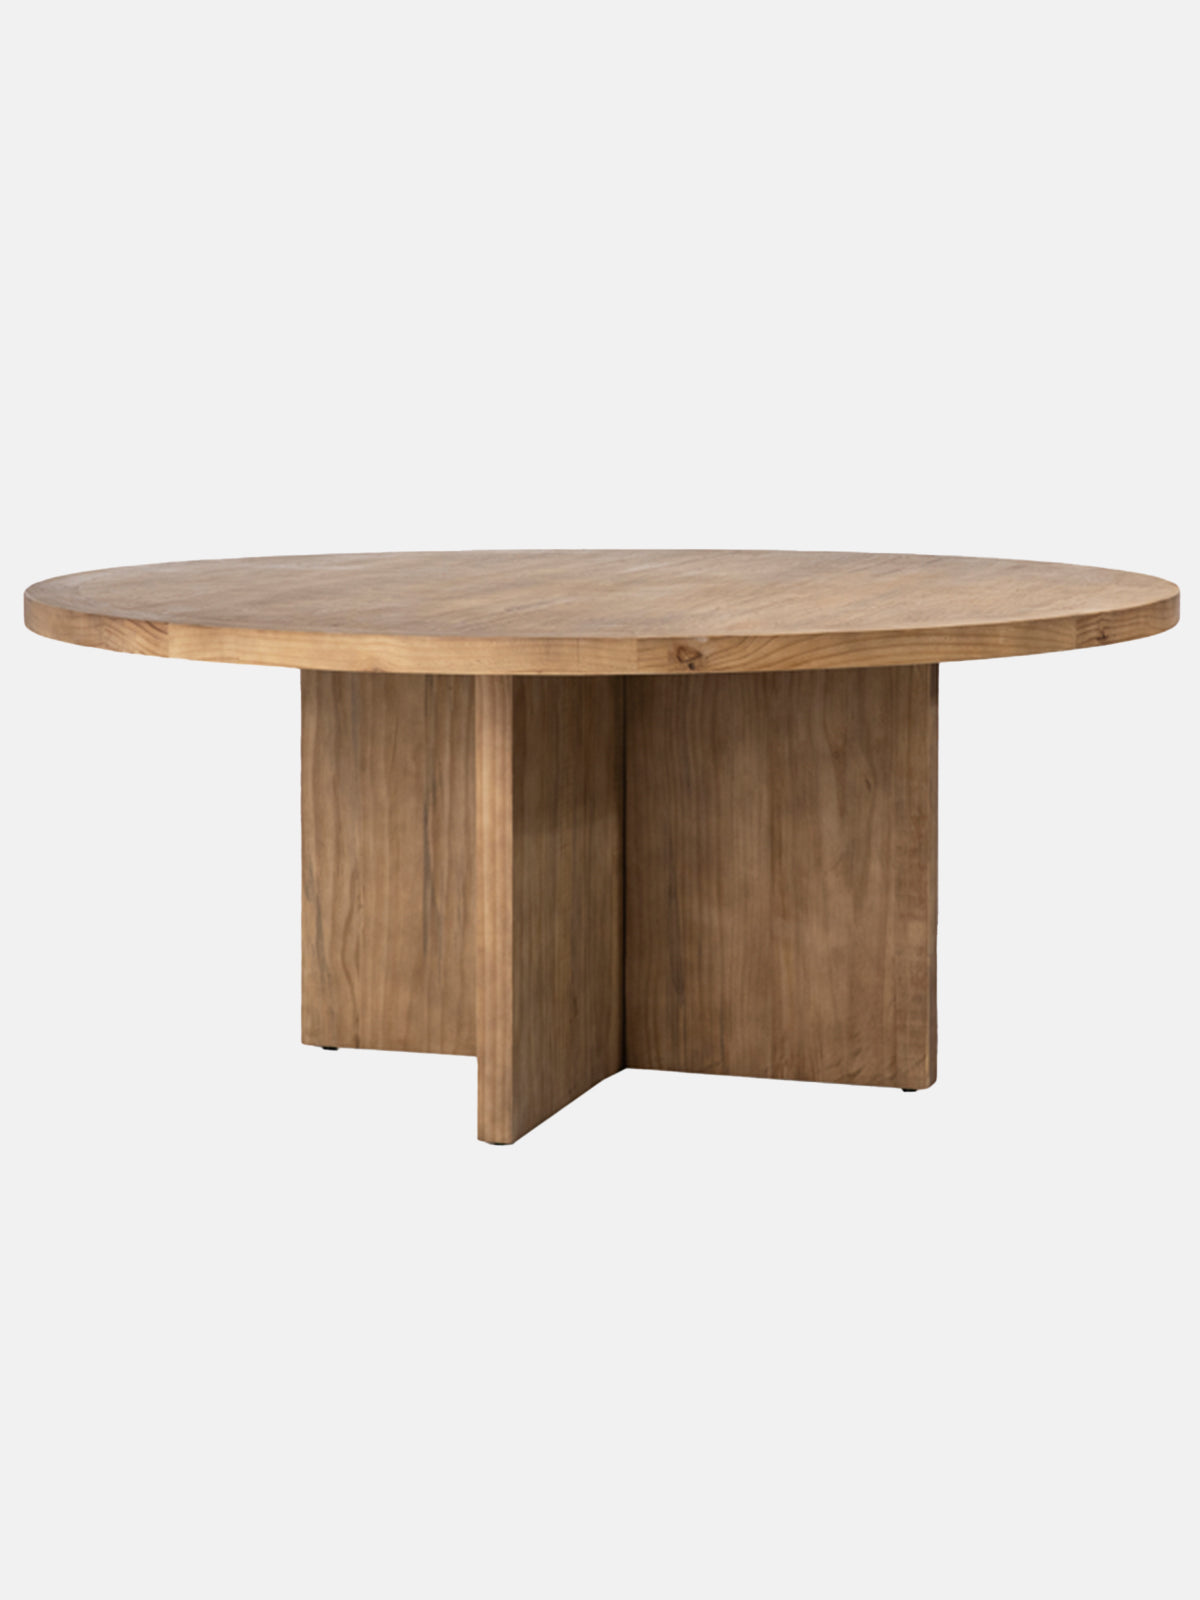 Harley 72" Round Natural Dining Table